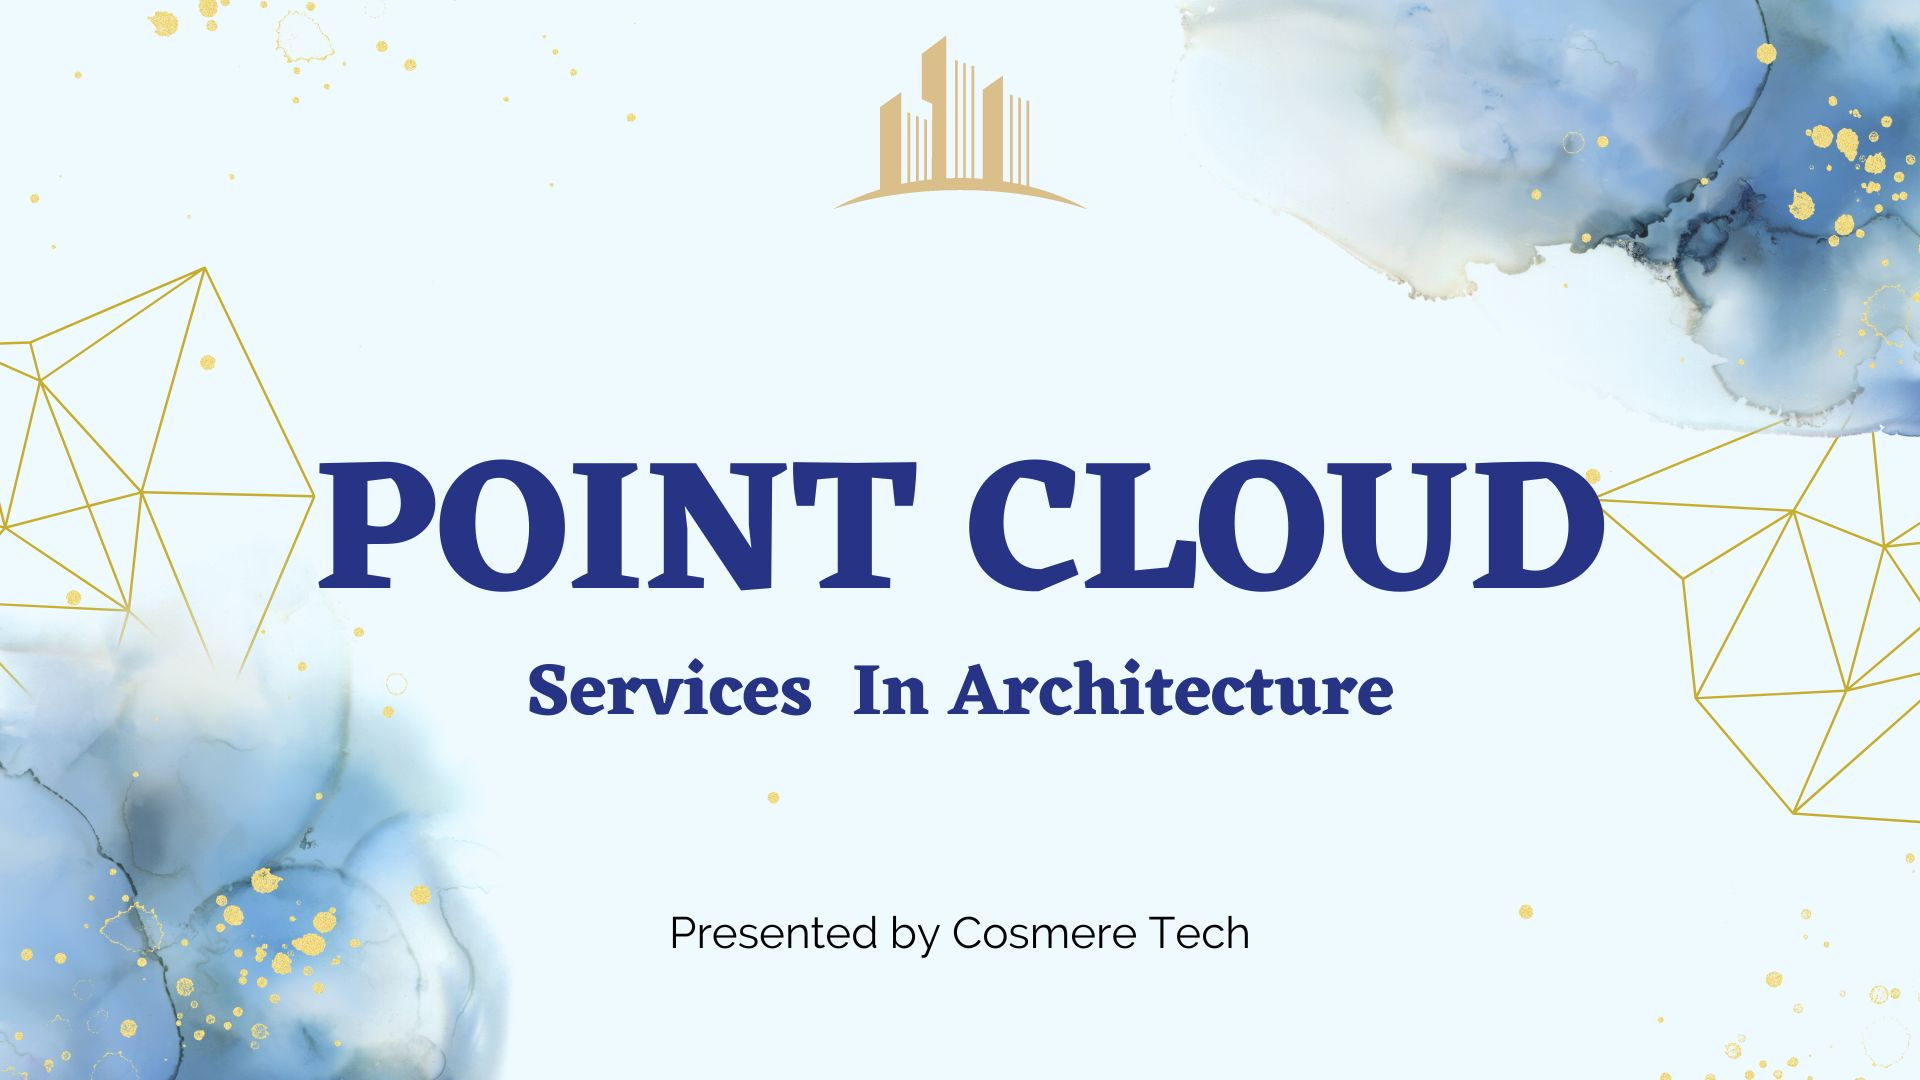 Pointcloud Services In Architecture by Cosmere Tech on Dribbble